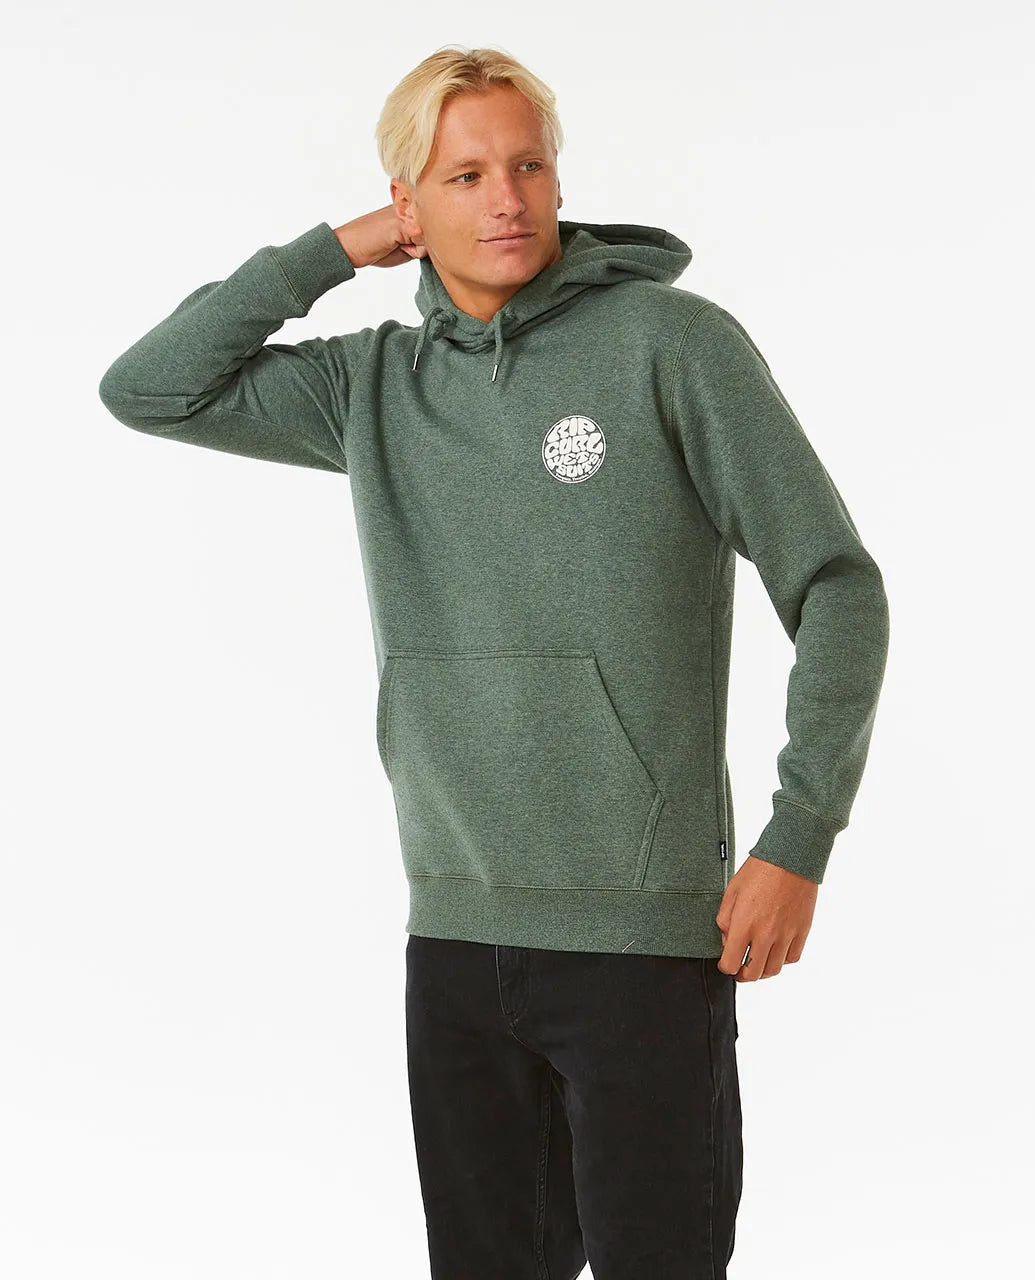 Rip Curl Wetsuit Icon Hood